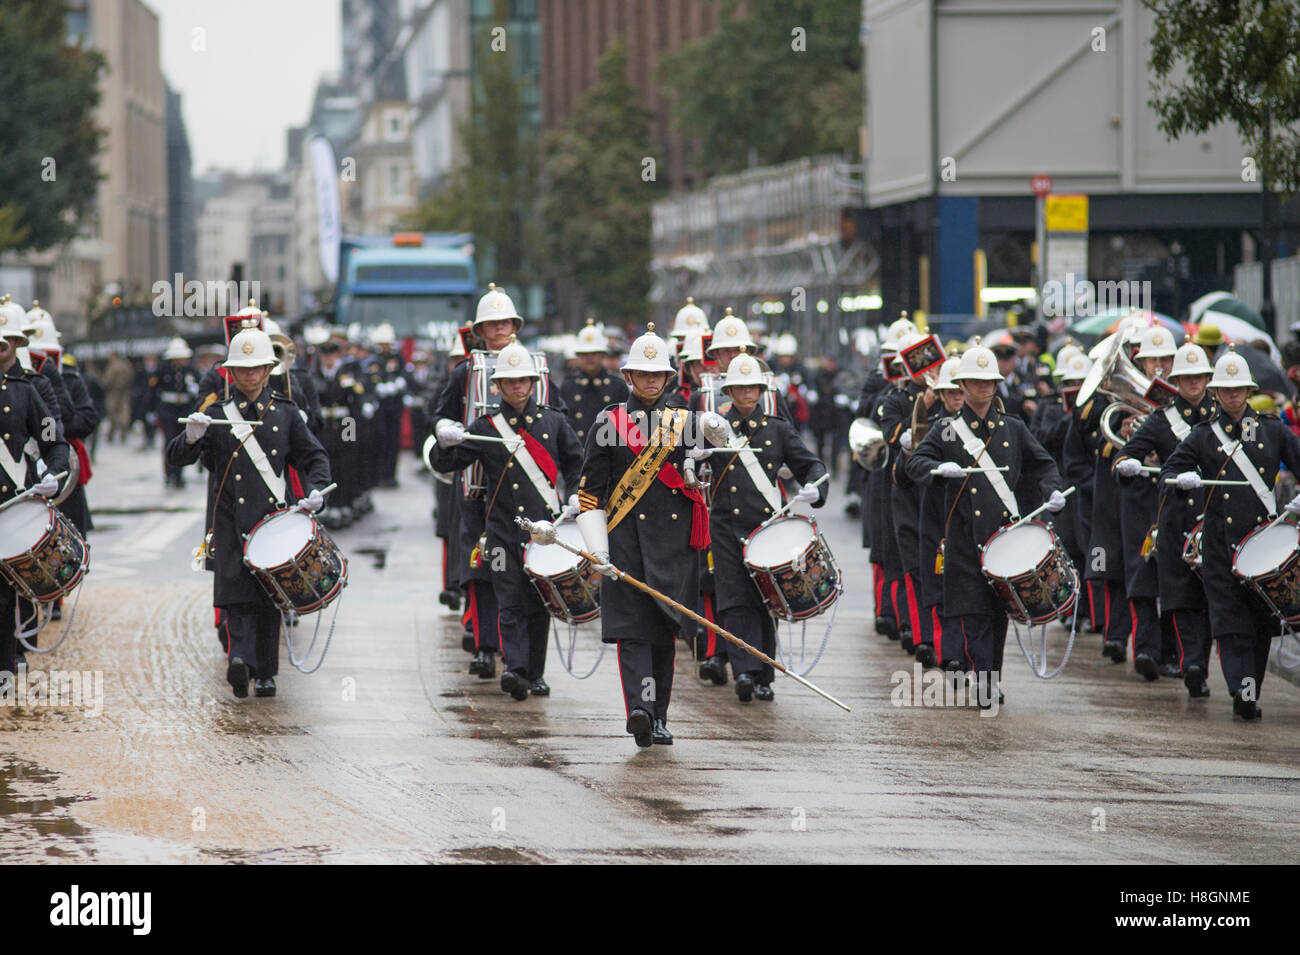 City of London, UK. 12th November, 2016. The world’s largest unrehearsed procession, The Lord Mayor’s Show, takes place through the City of London from the Guildhall to The Royal Courts of Justice on the Strand where Dr Andrew Parmley is sworn in on his first day in office. The ancient carnival is 801 years old this year and takes place in cold, wet weather in spite of which crowds line the route. Band of the Royal Marines on a rain soaked street. Credit:  Malcolm Park editorial/Alamy Live News. Stock Photo